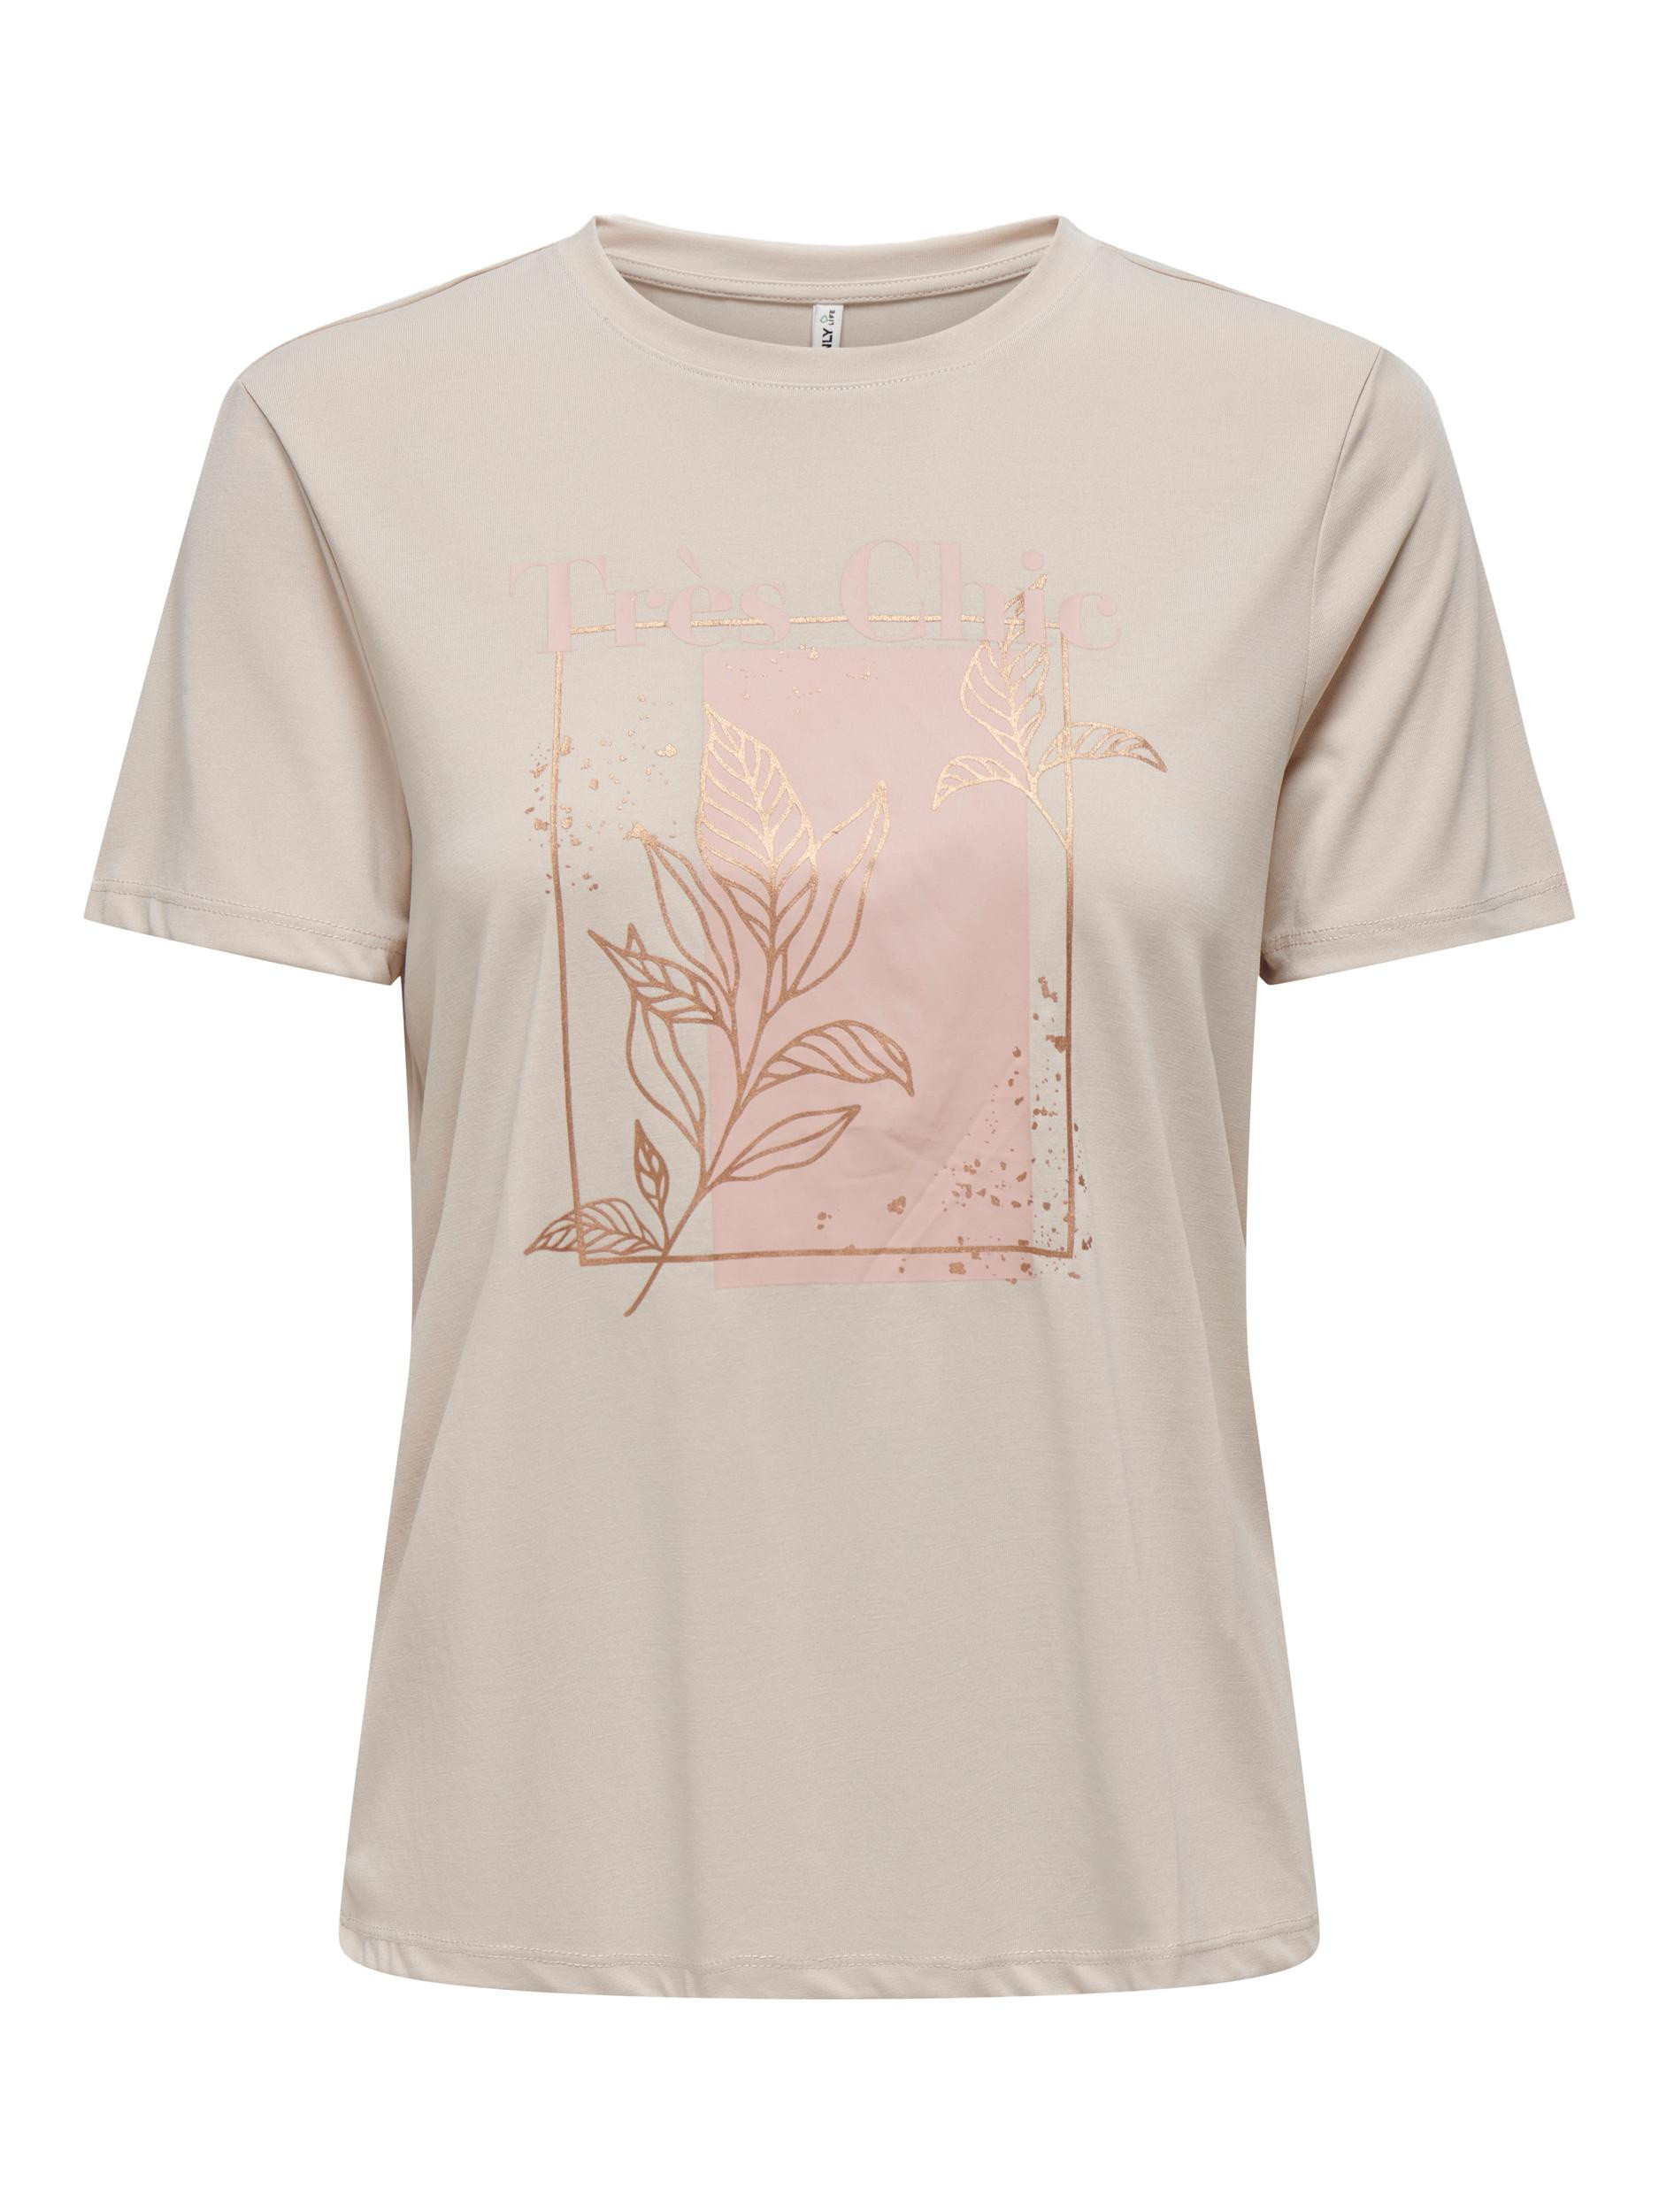 Only - Regular fit T-shirt with print, Beige, large image number 0